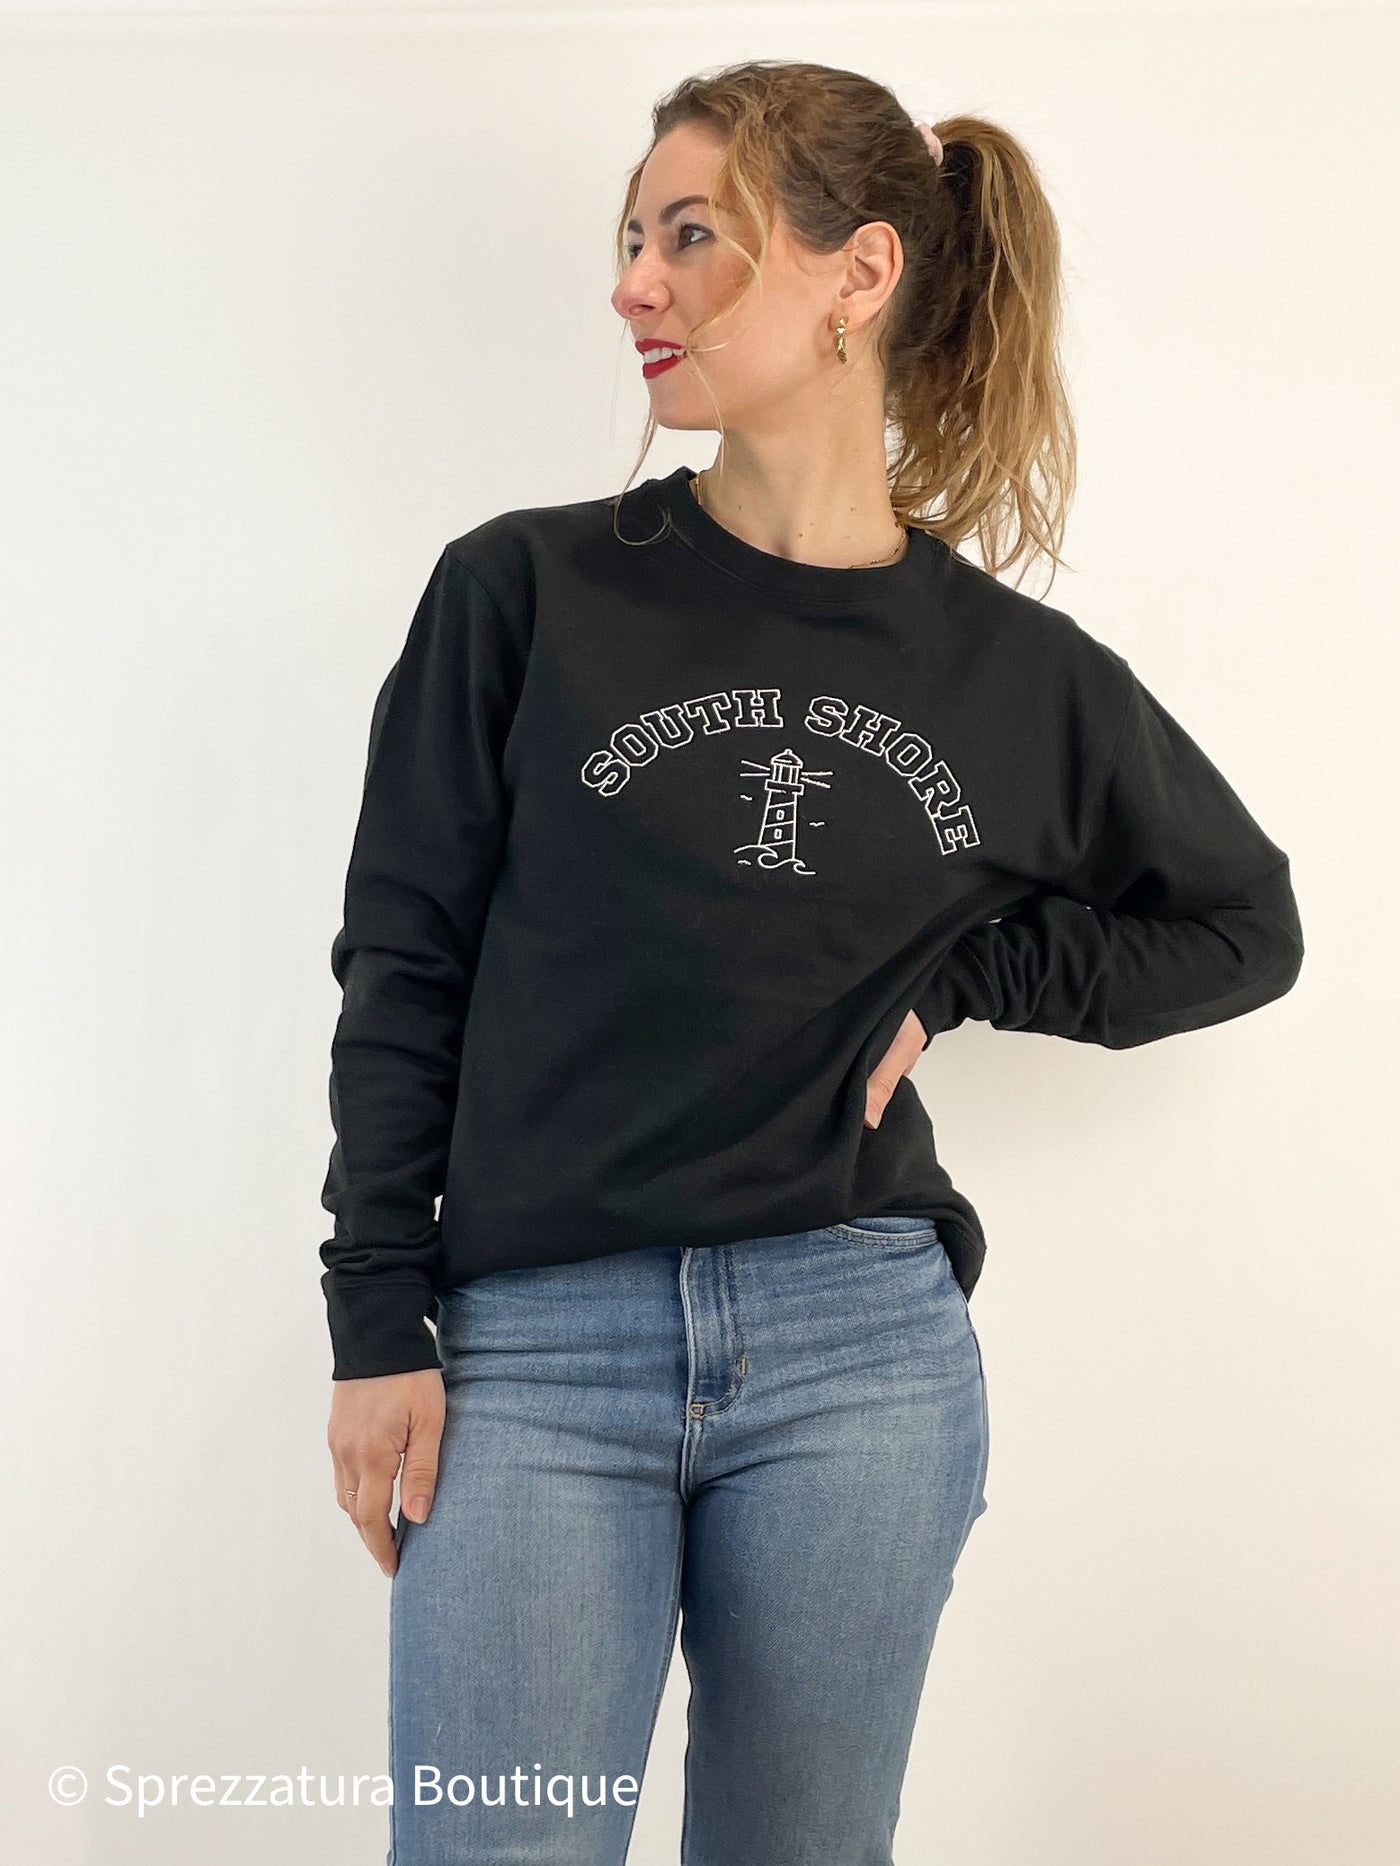 black embroidered womens crew neck south shore sweatshirt pull over preppy collegiate chic casual everyday gift for her holidays locally made Modern smart causal female chic effortless outfit womens ladies gift elegant effortless clothing everyday stylish clothes apparel outfits chic winter fall autumn professional style women’s boutique trendy teacher office cute outfit boutique clothes fashion quality work from home neutral wardrobe essential basics lounge athleisure gift for her midsize curvy sizes 